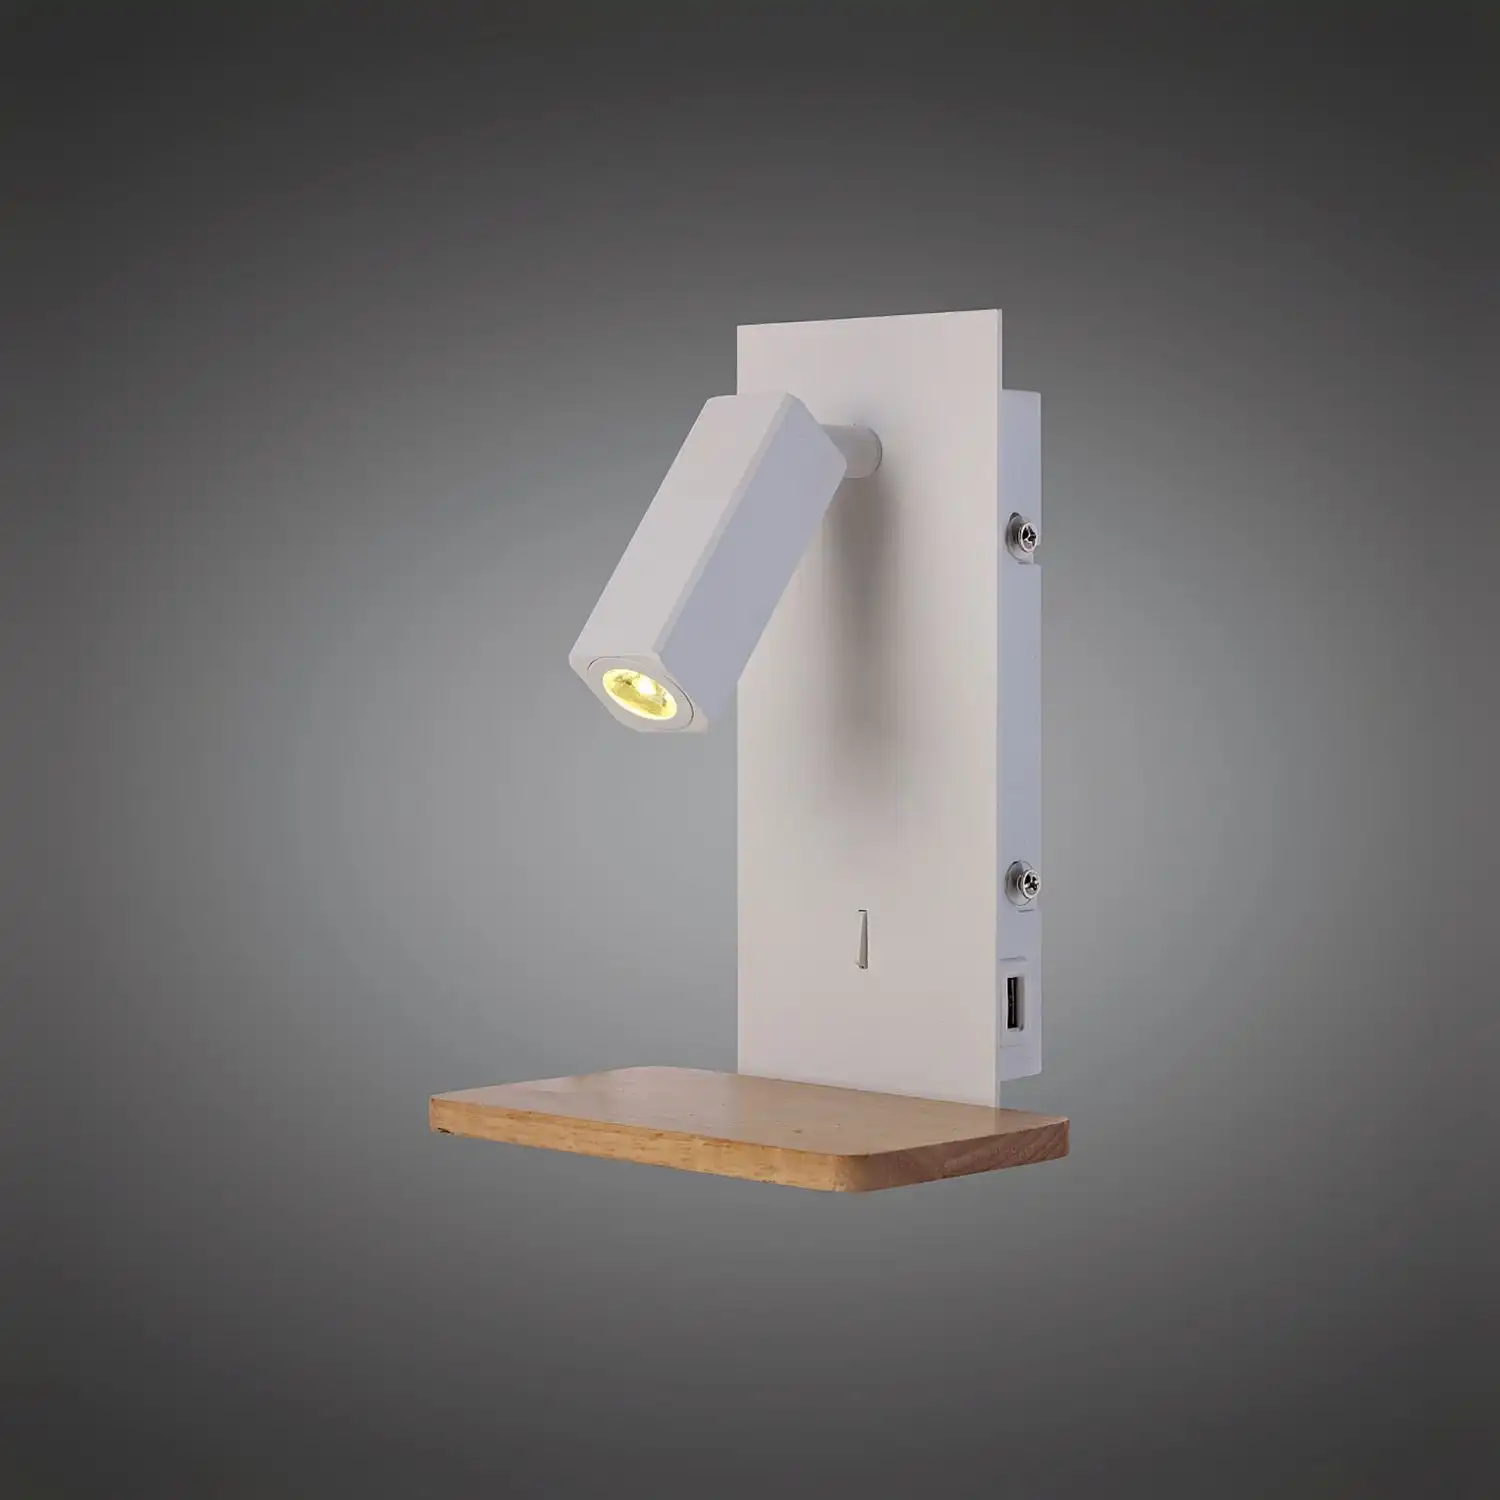 Nordica II Position Switched Wall Light With USB Socket, 180lm, 1x3W 3000K LED White Beech, 3yrs Warranty